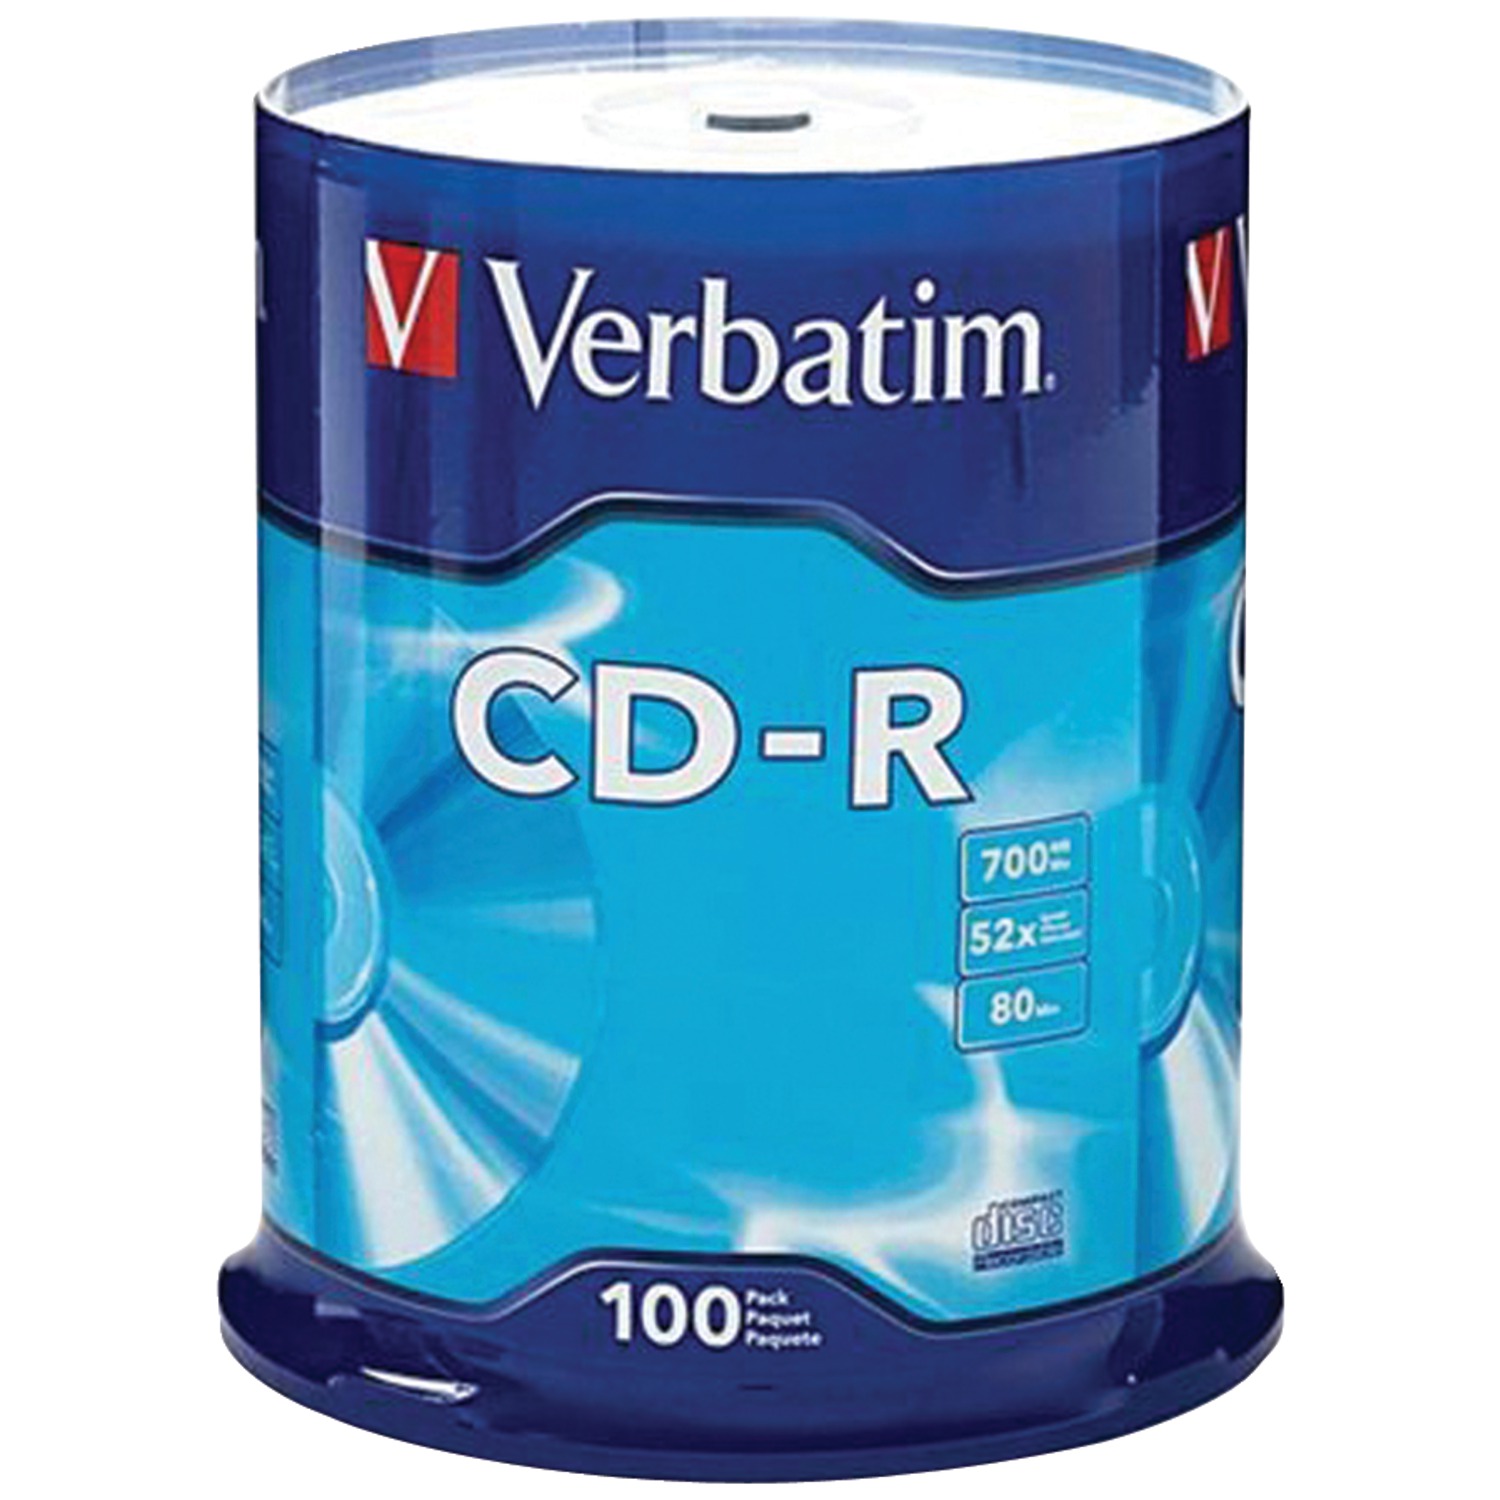 Verbatim 94554 700MB 80-Minute 52x CD-RS 100-Count Spindle and CD/DVD Paper Sleeves with Clear Window, 100-Pack - image 4 of 4